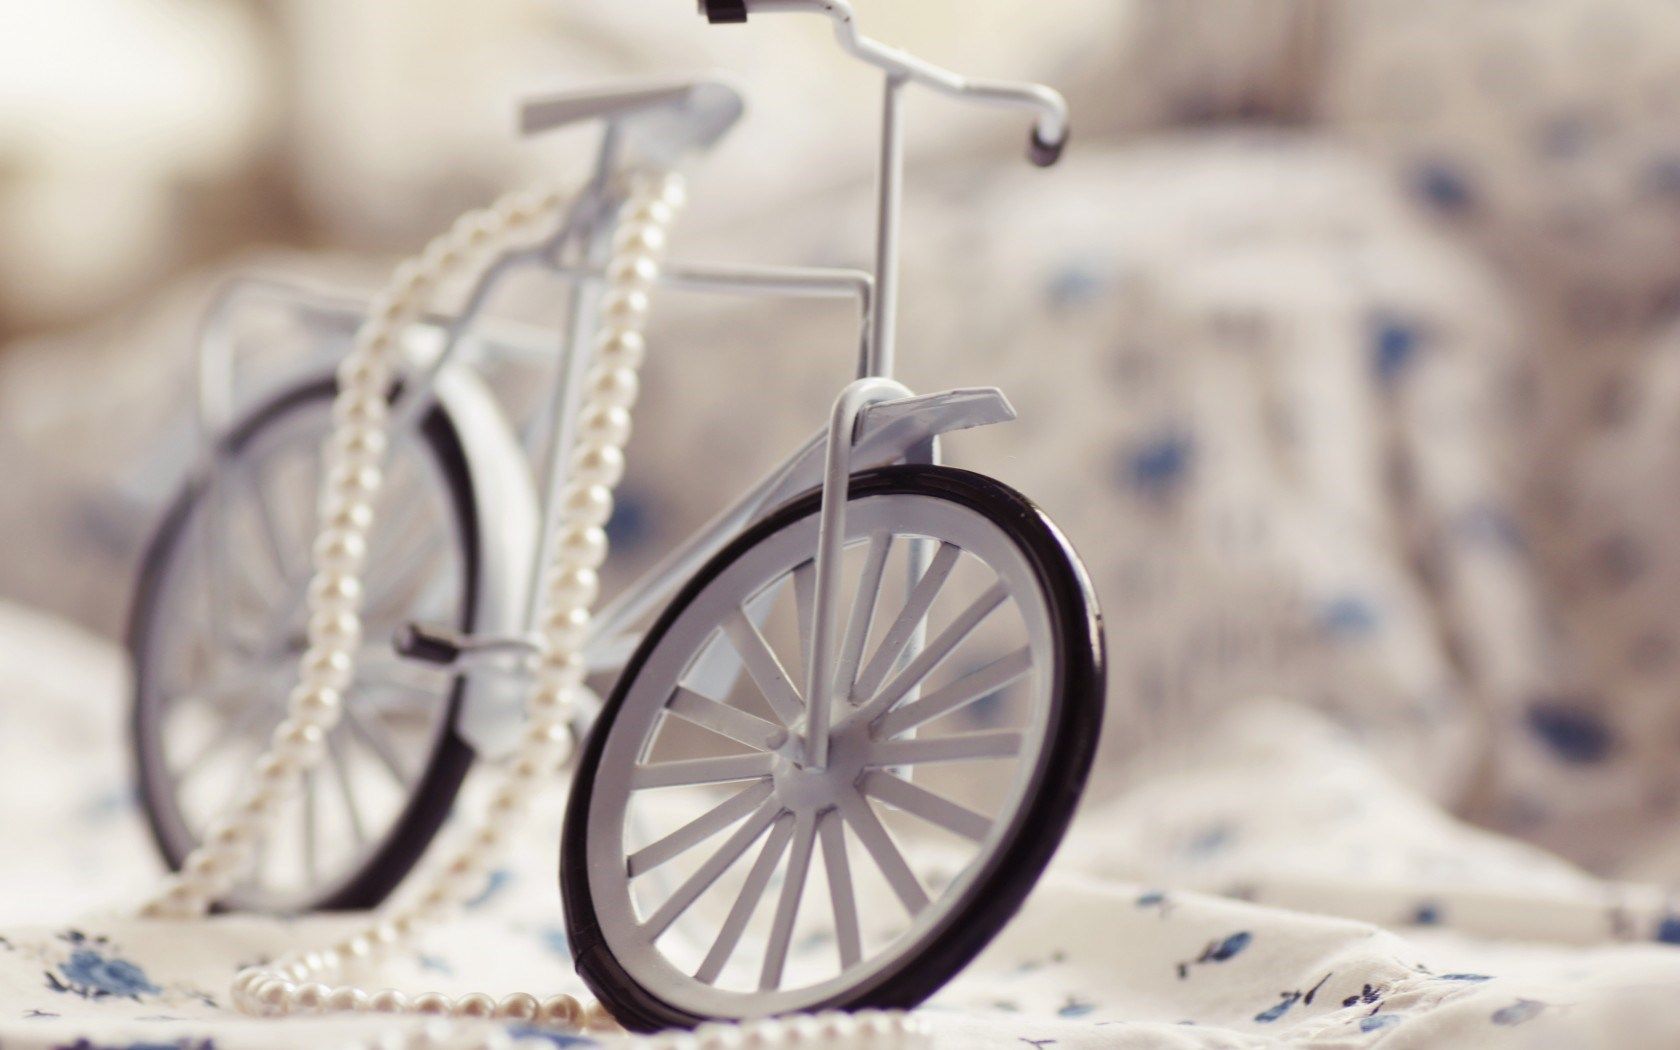 HD wallpaper, Bicycle, Wheels, Toy